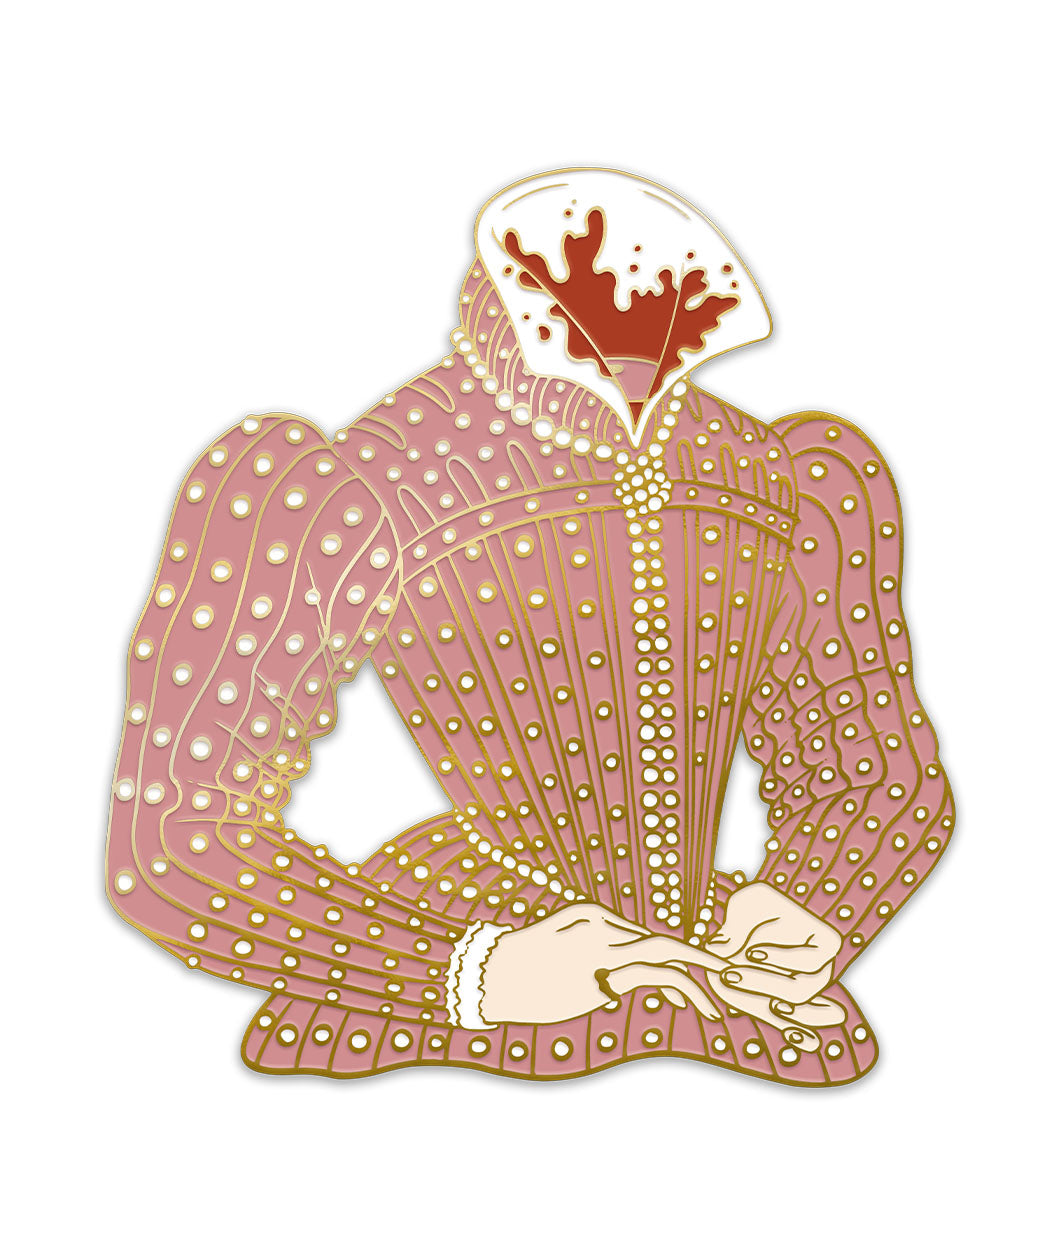 A pink bodice pin with little white dots that appear to be pearls. The neck is severed with blood spilling onto the white neck cuff. Depicts Mary's Body from Noble Blood. 